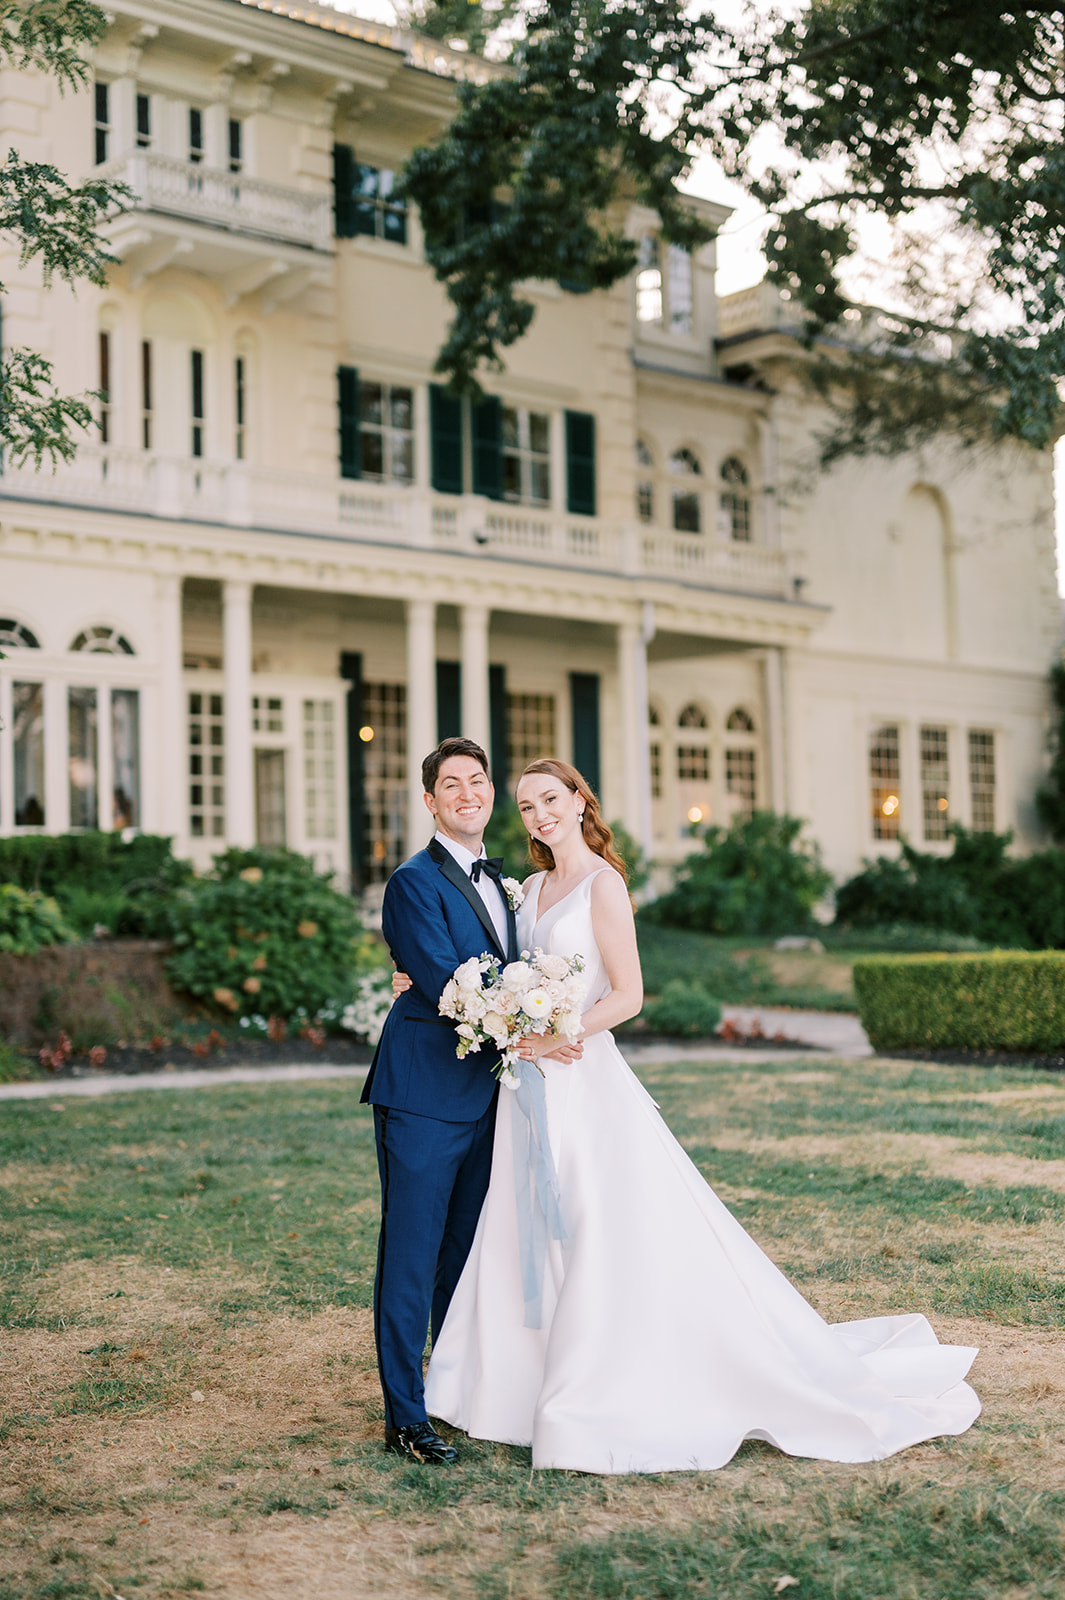 bride and groom stand on lawn in front of Timeless Garden Wedding at Historic Glen Foerd Estate in Philadelphia, PA